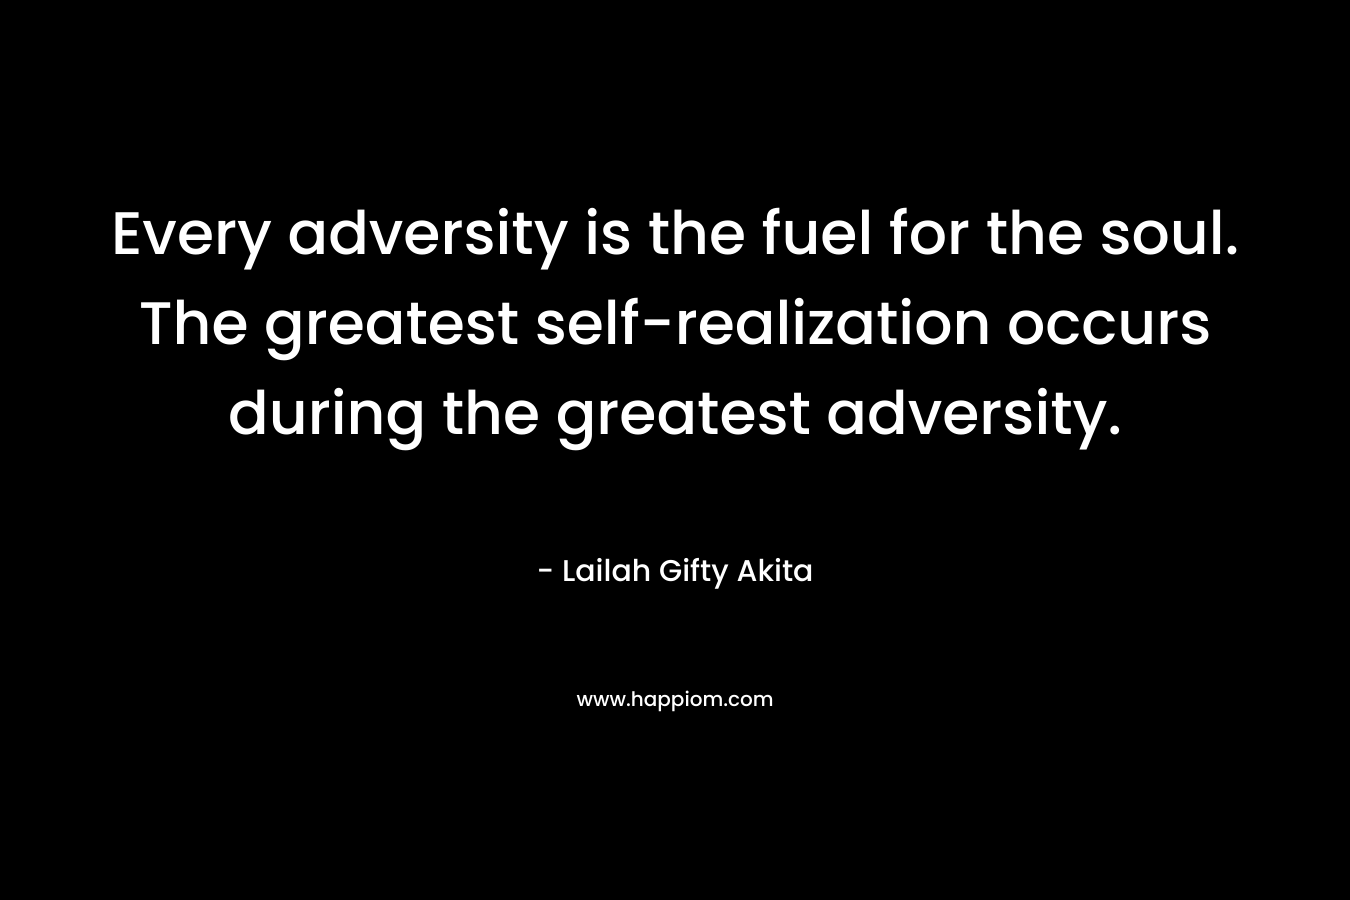 Every adversity is the fuel for the soul. The greatest self-realization occurs during the greatest adversity.